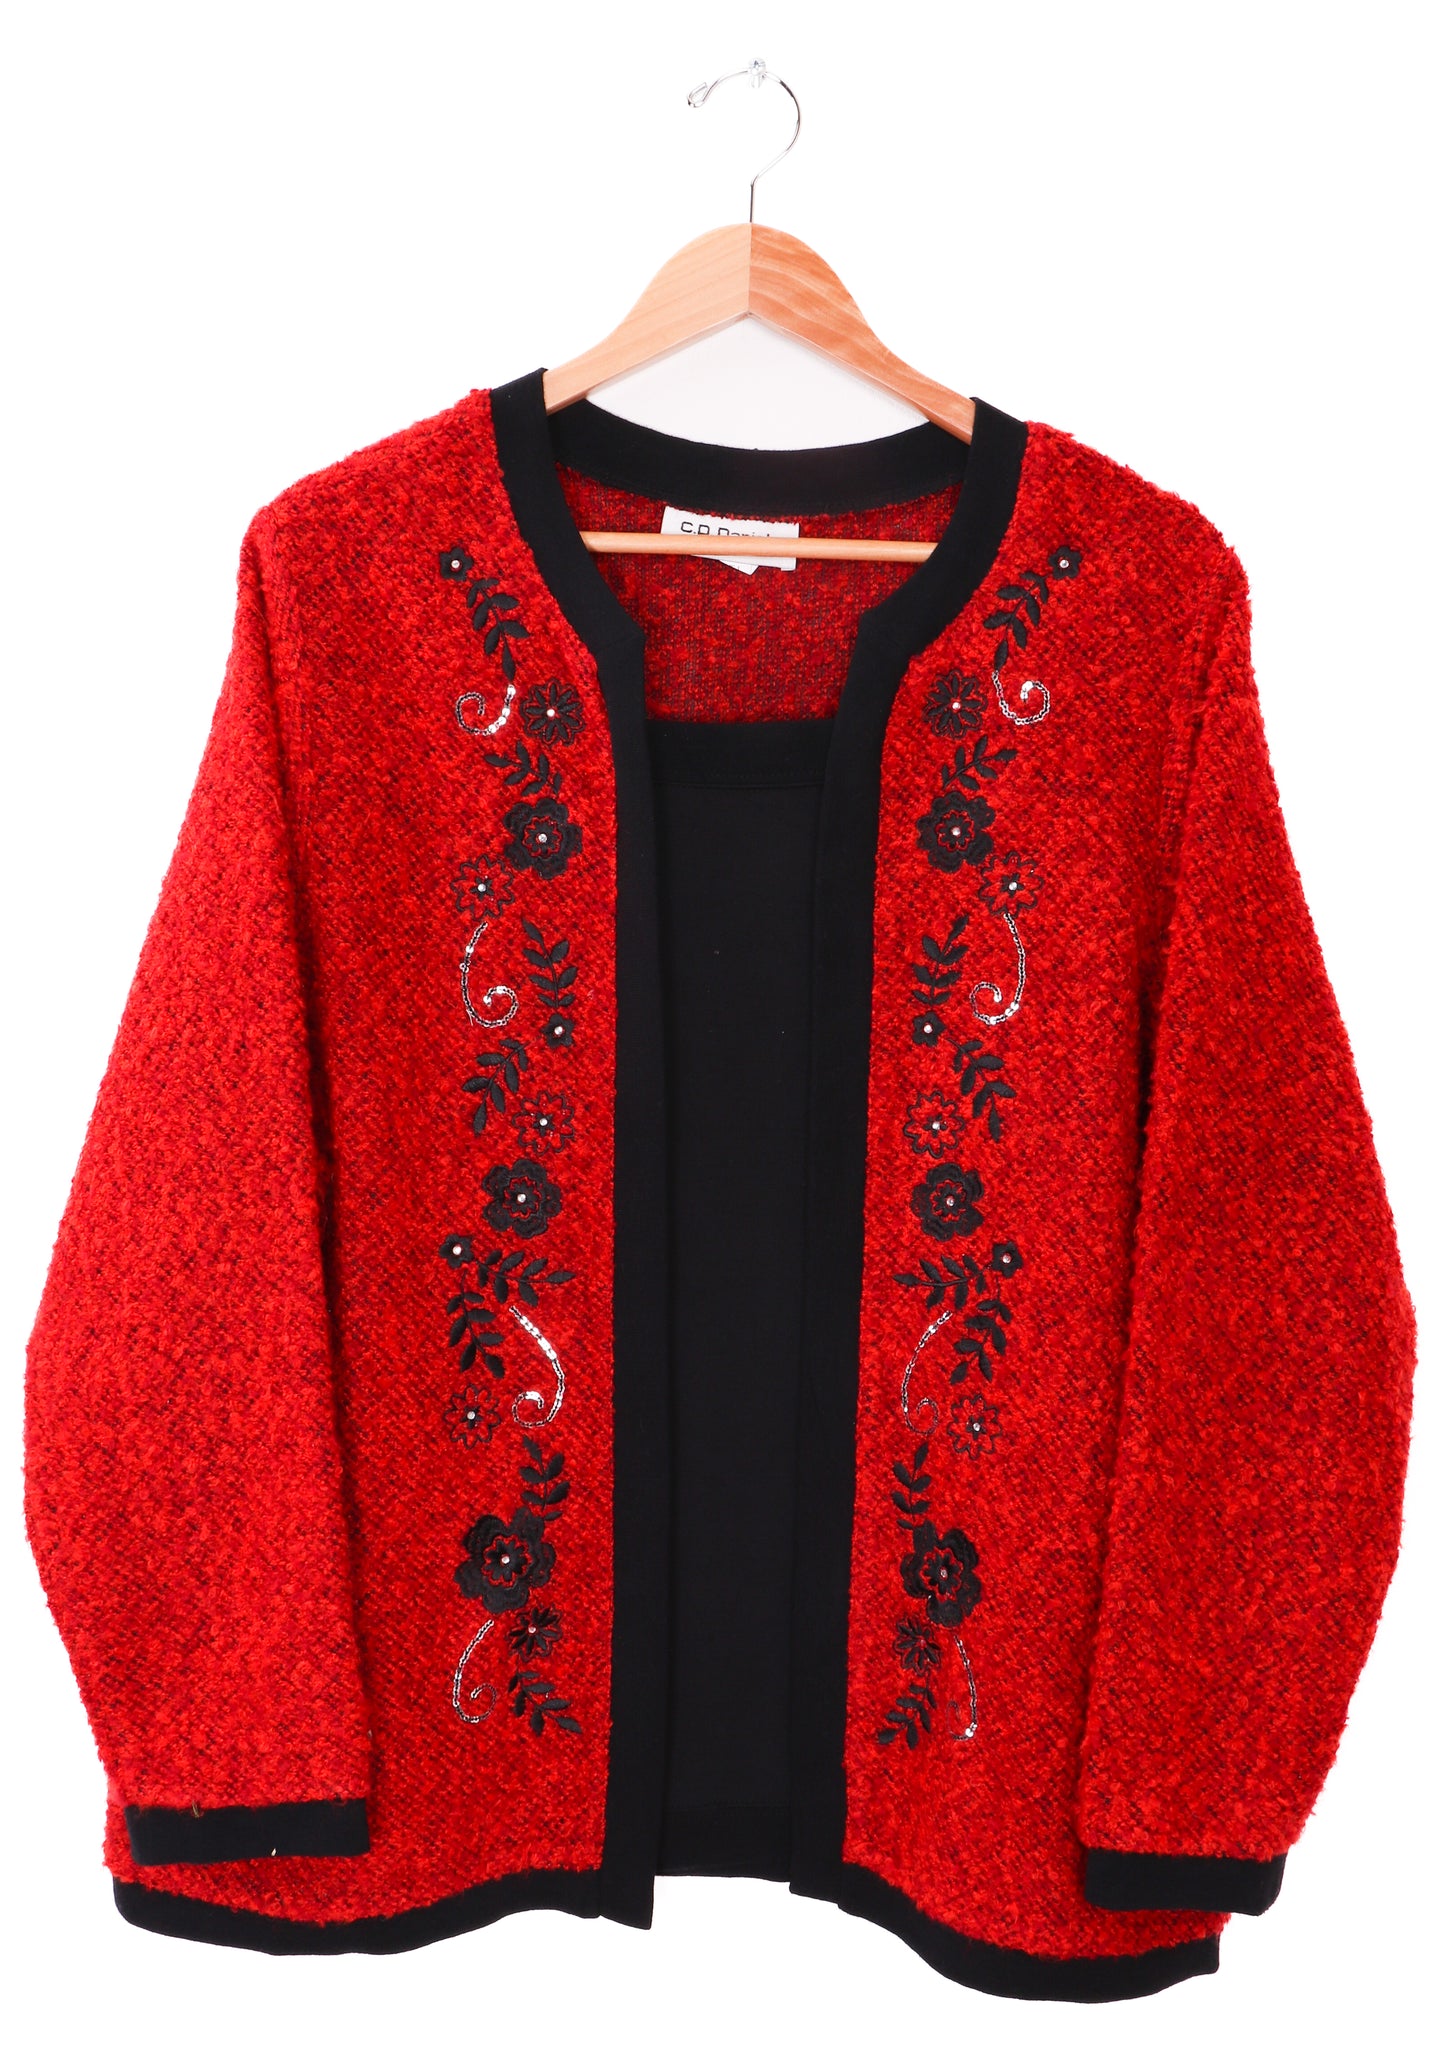 C.D. Daniels Red Floral Sweater Top